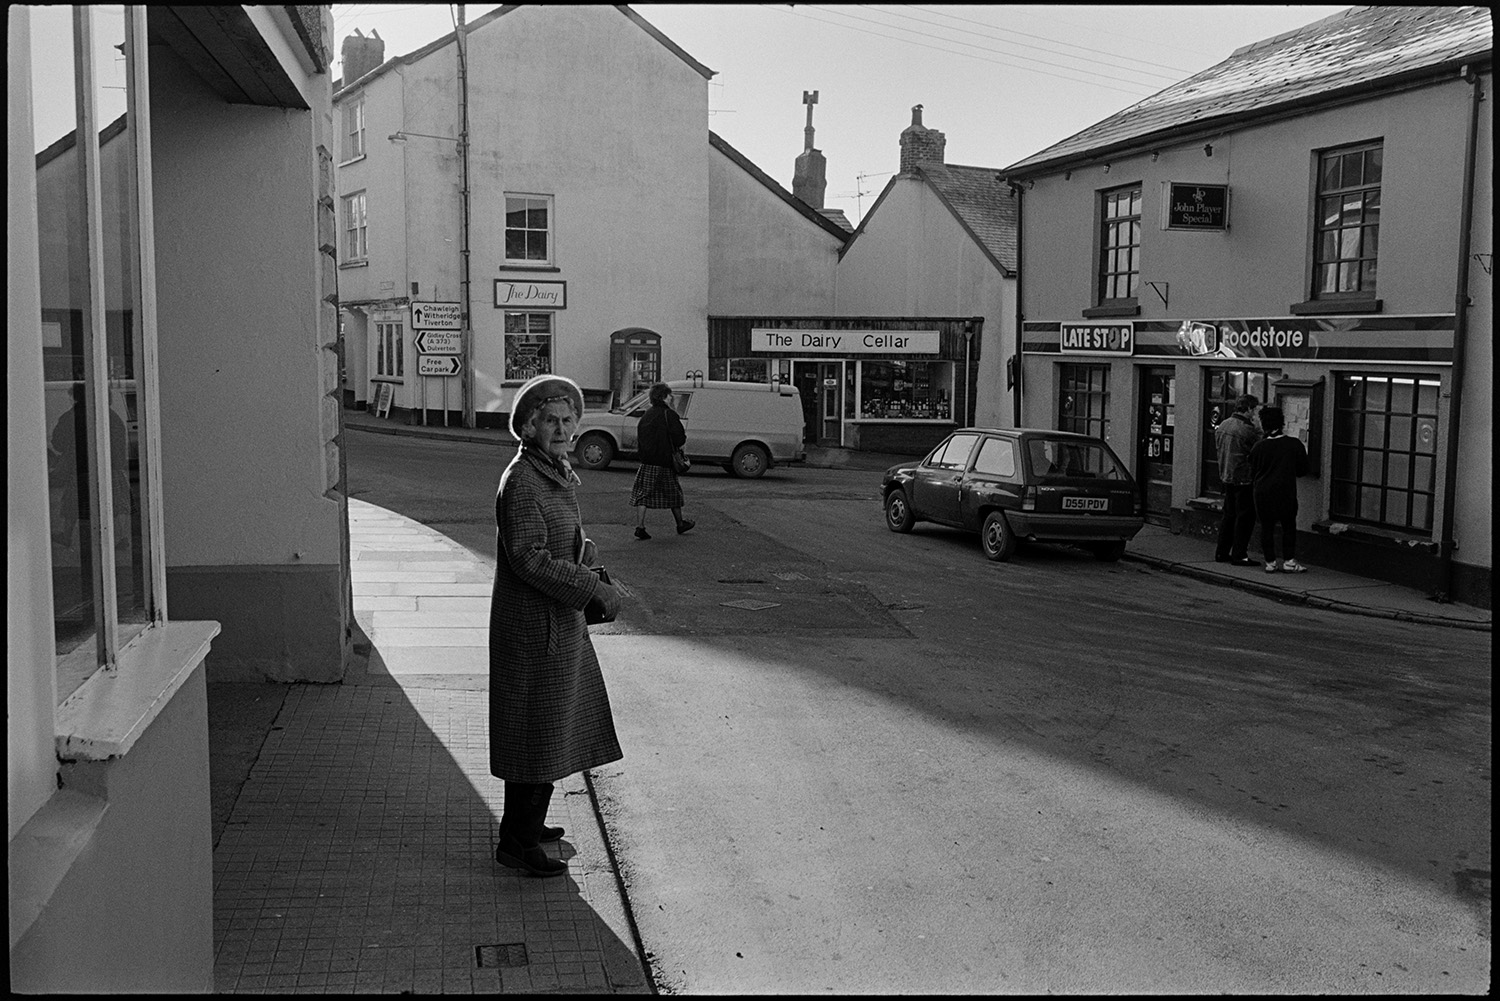 Street scene, early morning. 
[People shopping in Fore Street, Chulmleigh in the early morning. A woman is stood on the pavement in the foreground and two people are looking at a noticeboard outside the shopfront of Late Stop Food store. The shop front of The Dairy Cellar is also visible in the background.]